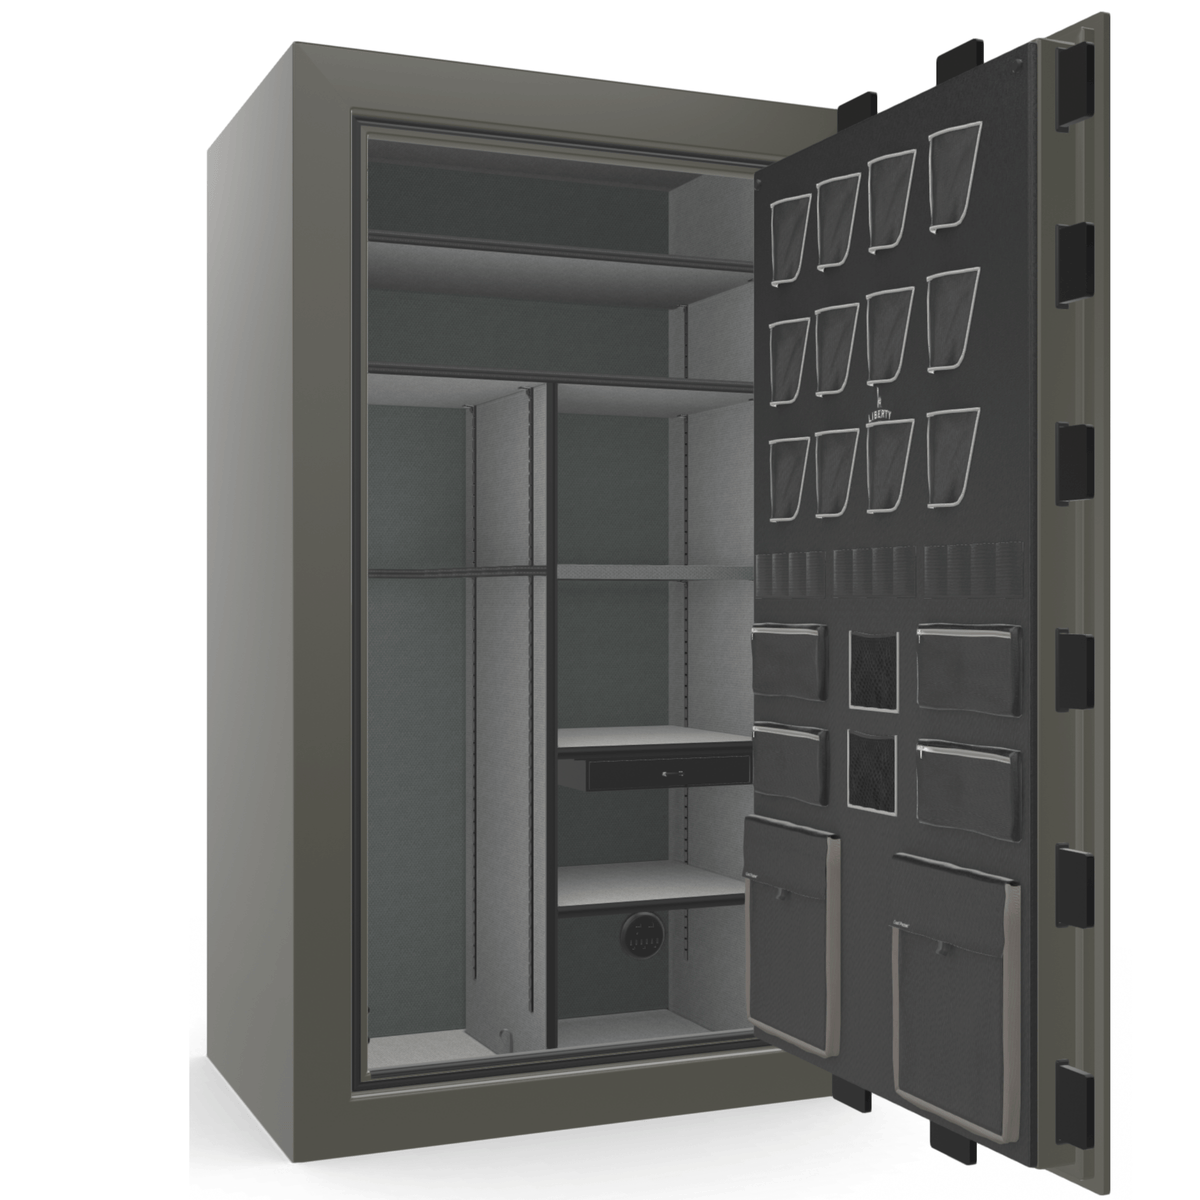 Liberty Safe Classic Plus 50 in Feathered Gray Gloss, open door.